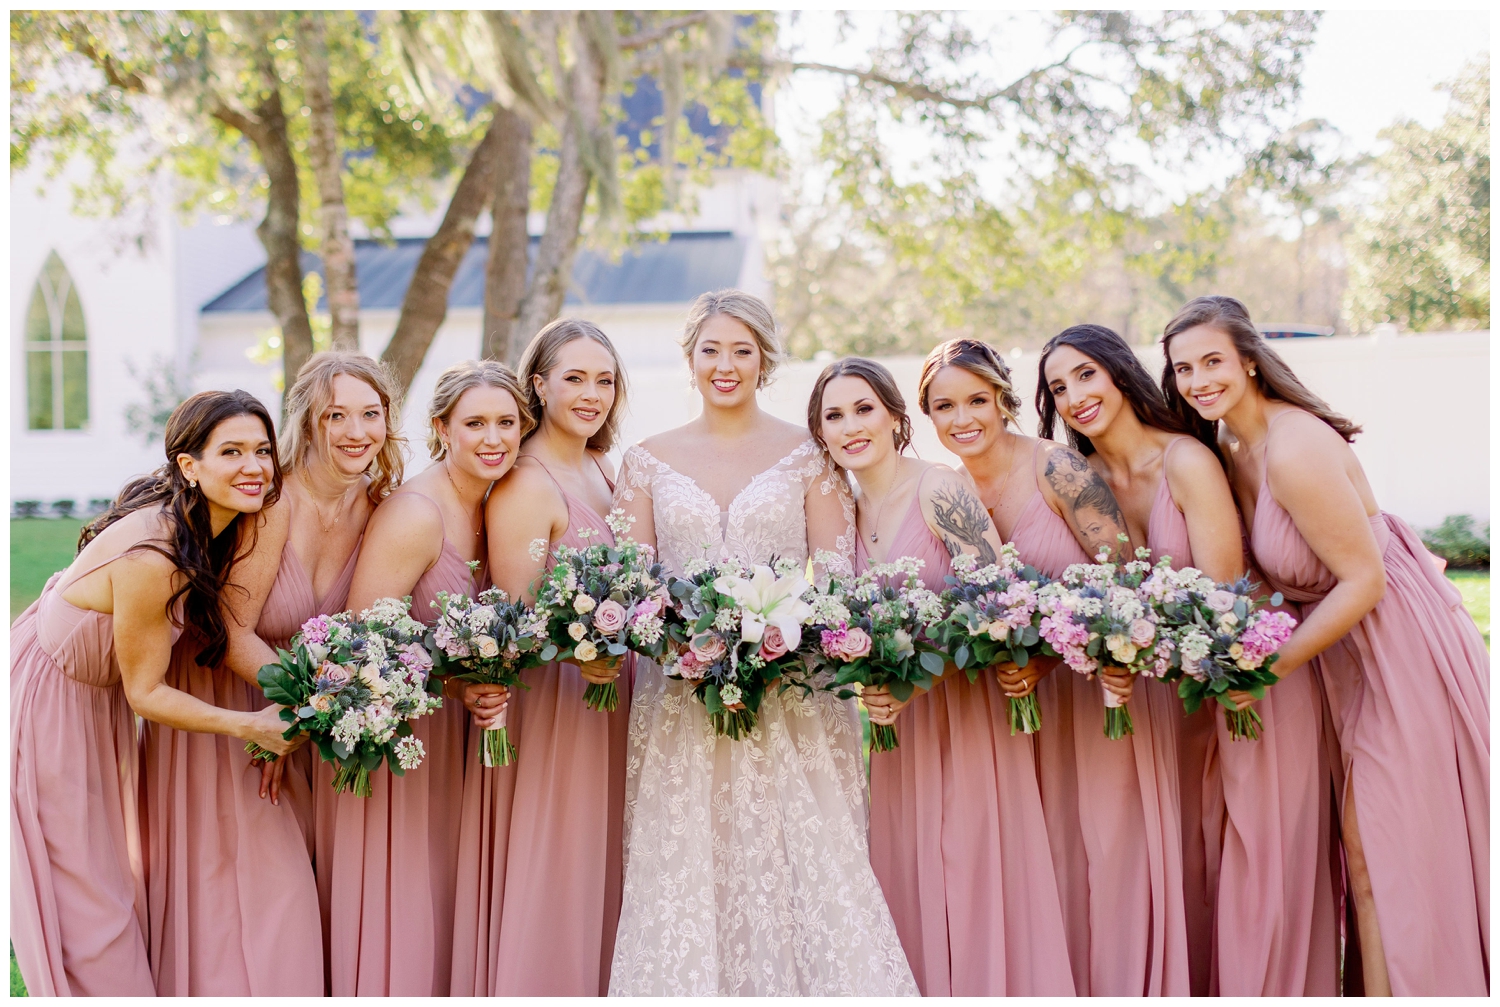 bride with bridesmaid portrait in blush dresses outside at The Springs Wallisville Wedding venue